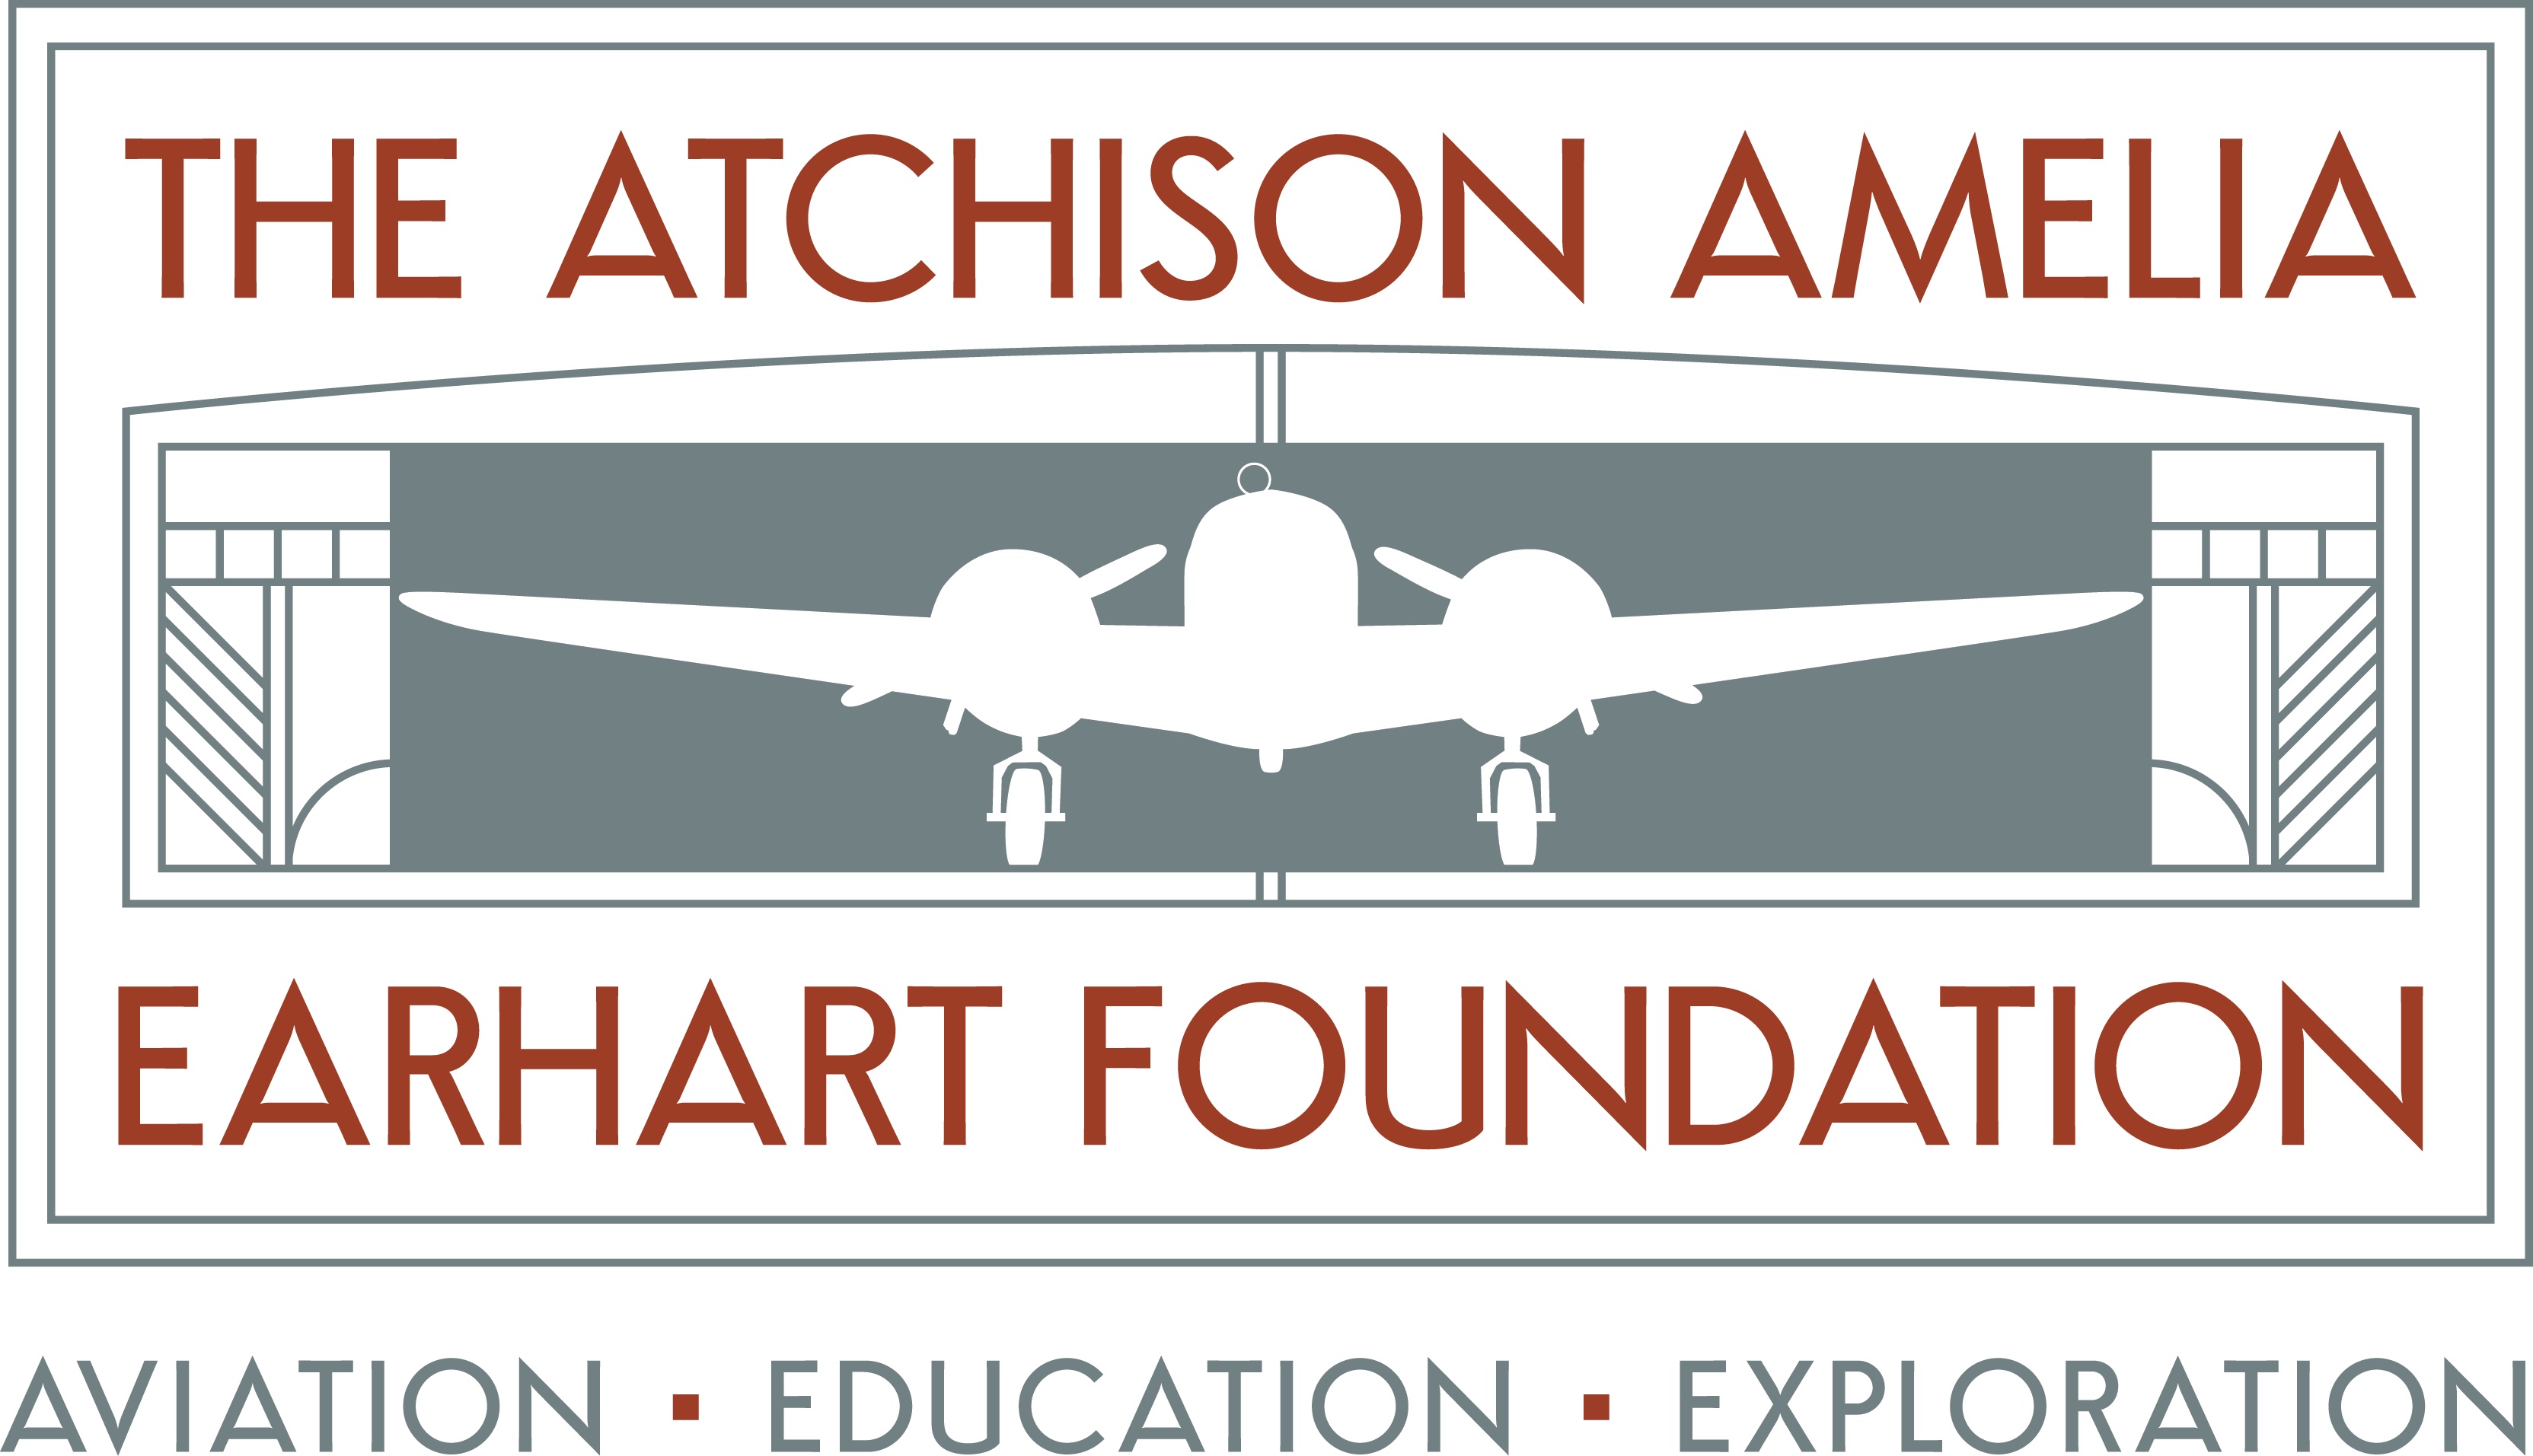 The Atchison Amelia Earhart Foundation led the statue project for Kansas and is the sole funder.